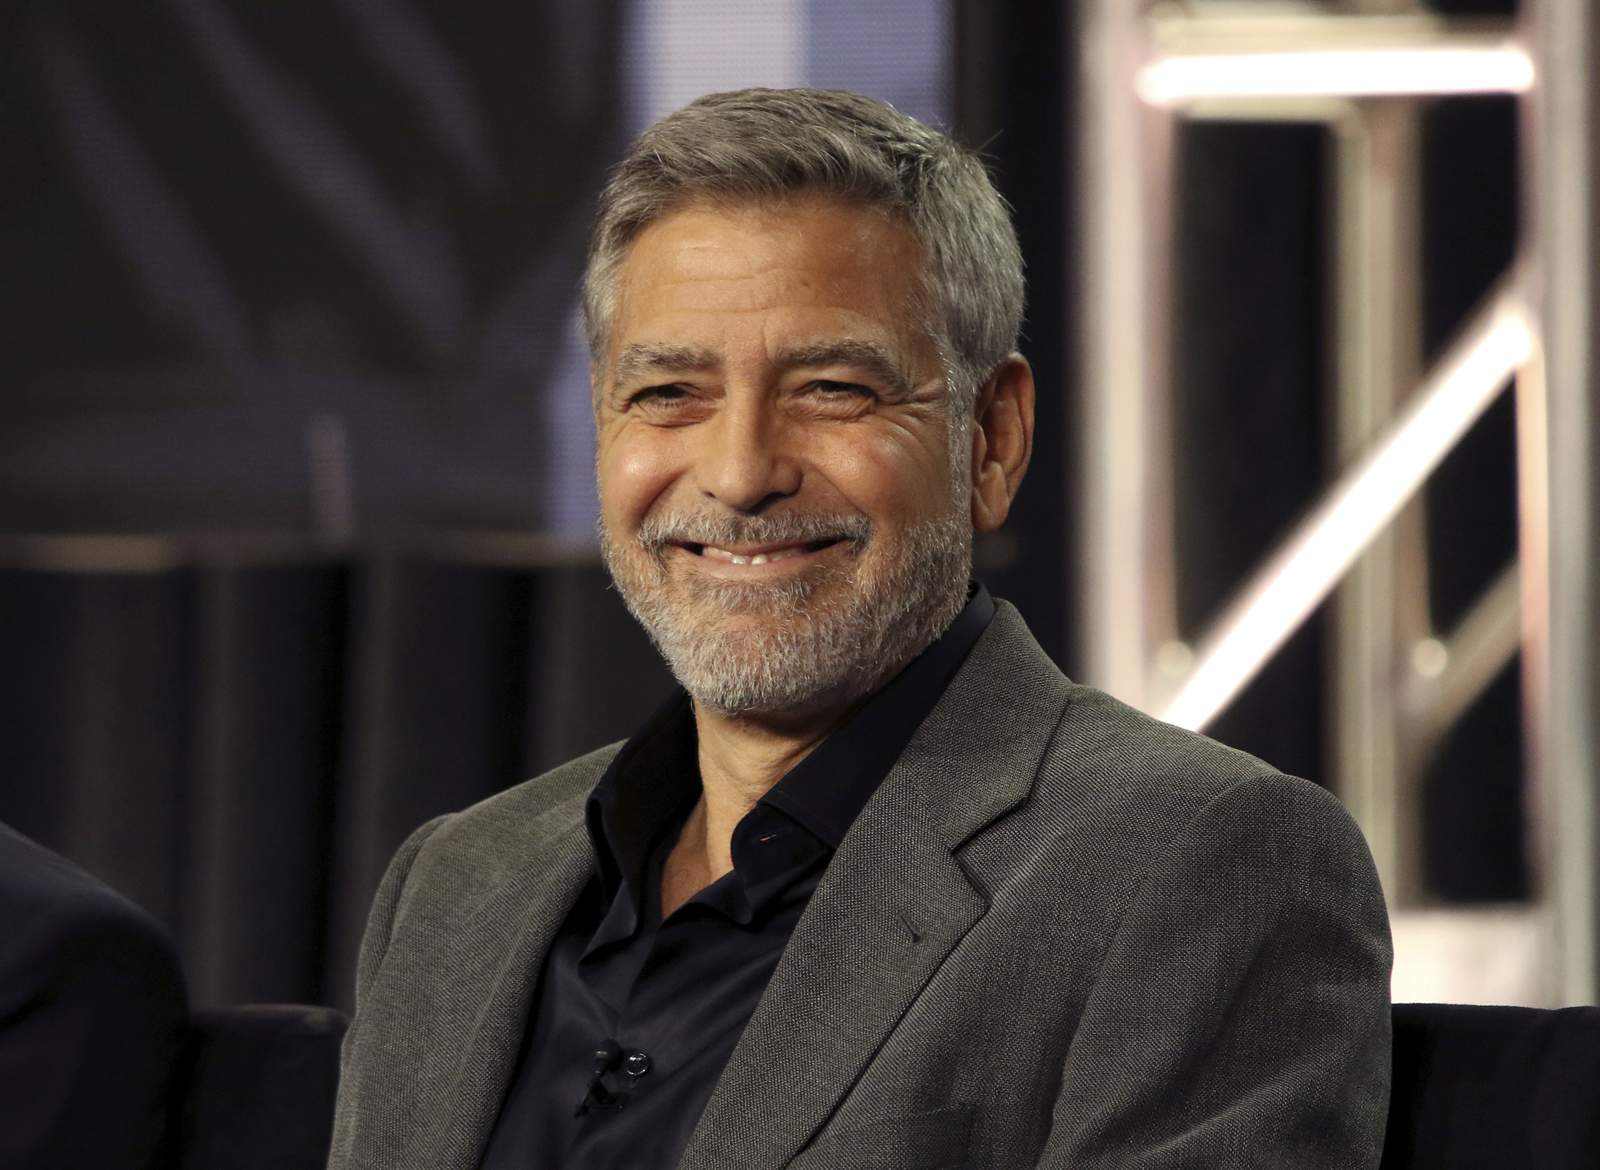 George Clooney's secret to cutting his hair, as seen on TV